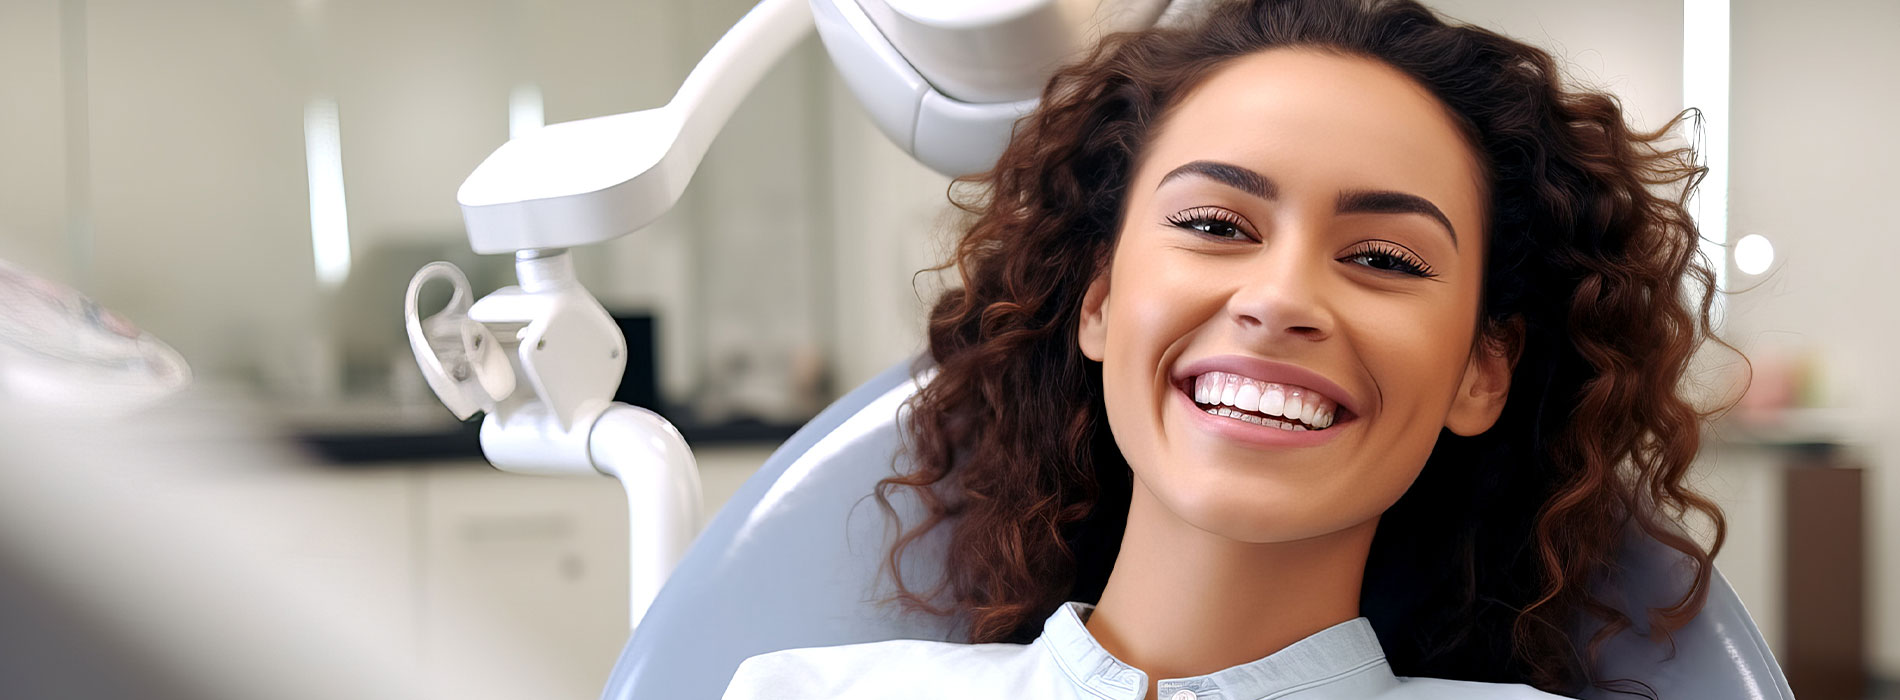 Village Dental | Oral Exams, Cosmetic Dentistry and Teeth Whitening